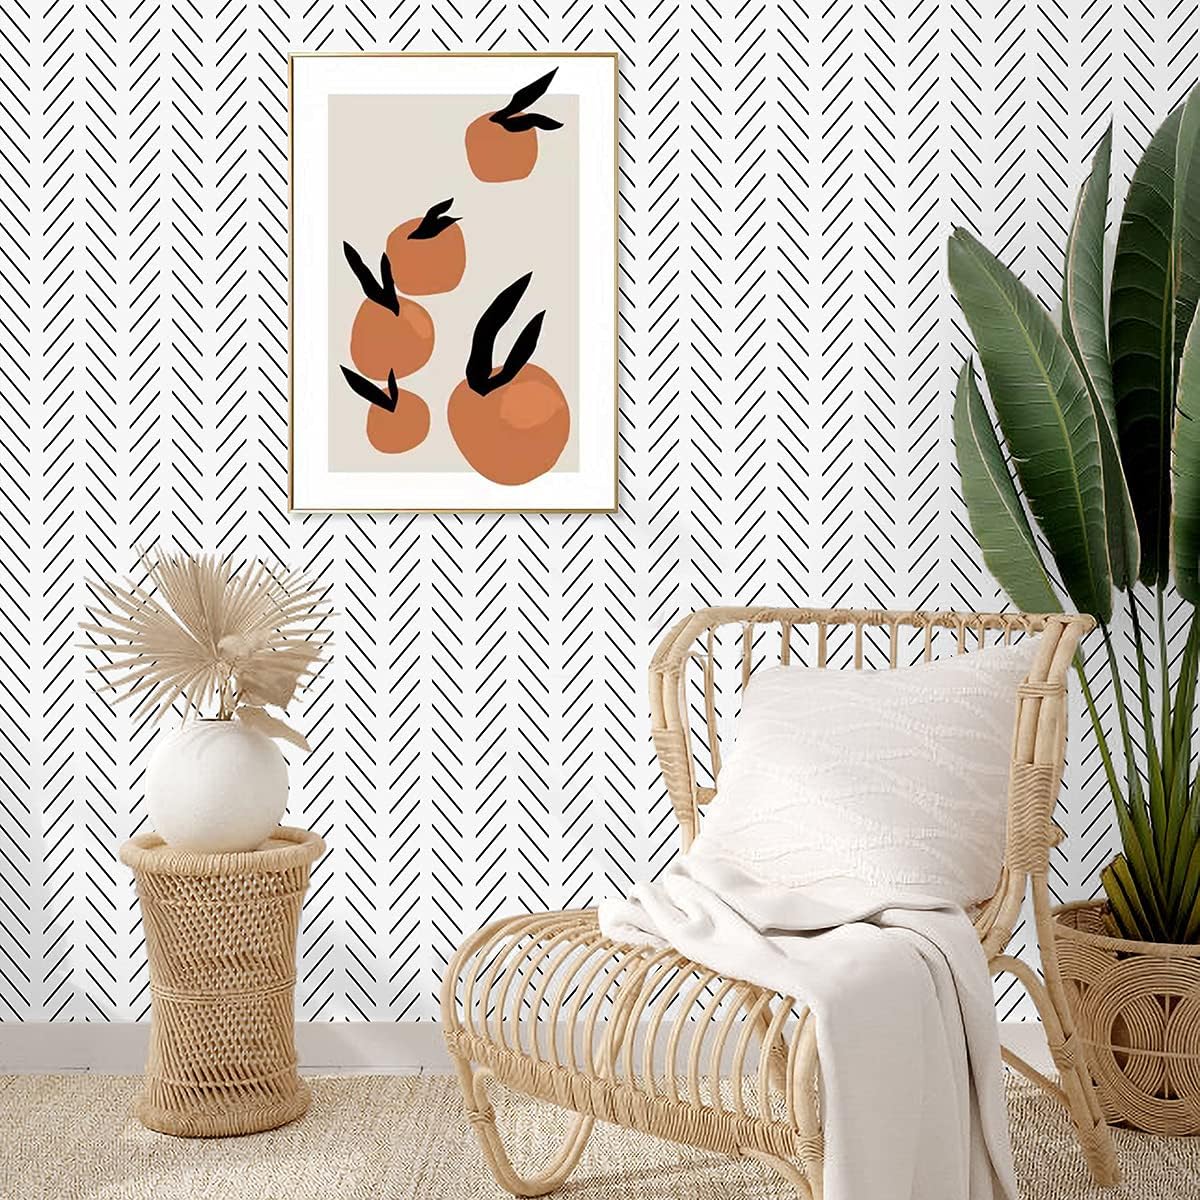 Erfoni Black and White Peel and Stick Wallpaper Modern Herringbone Contact Paper Bathroom 17.7inch x 118.1inch Geometric Removable Wall Paper Peel and Stick Self Adhesive Contact Paper